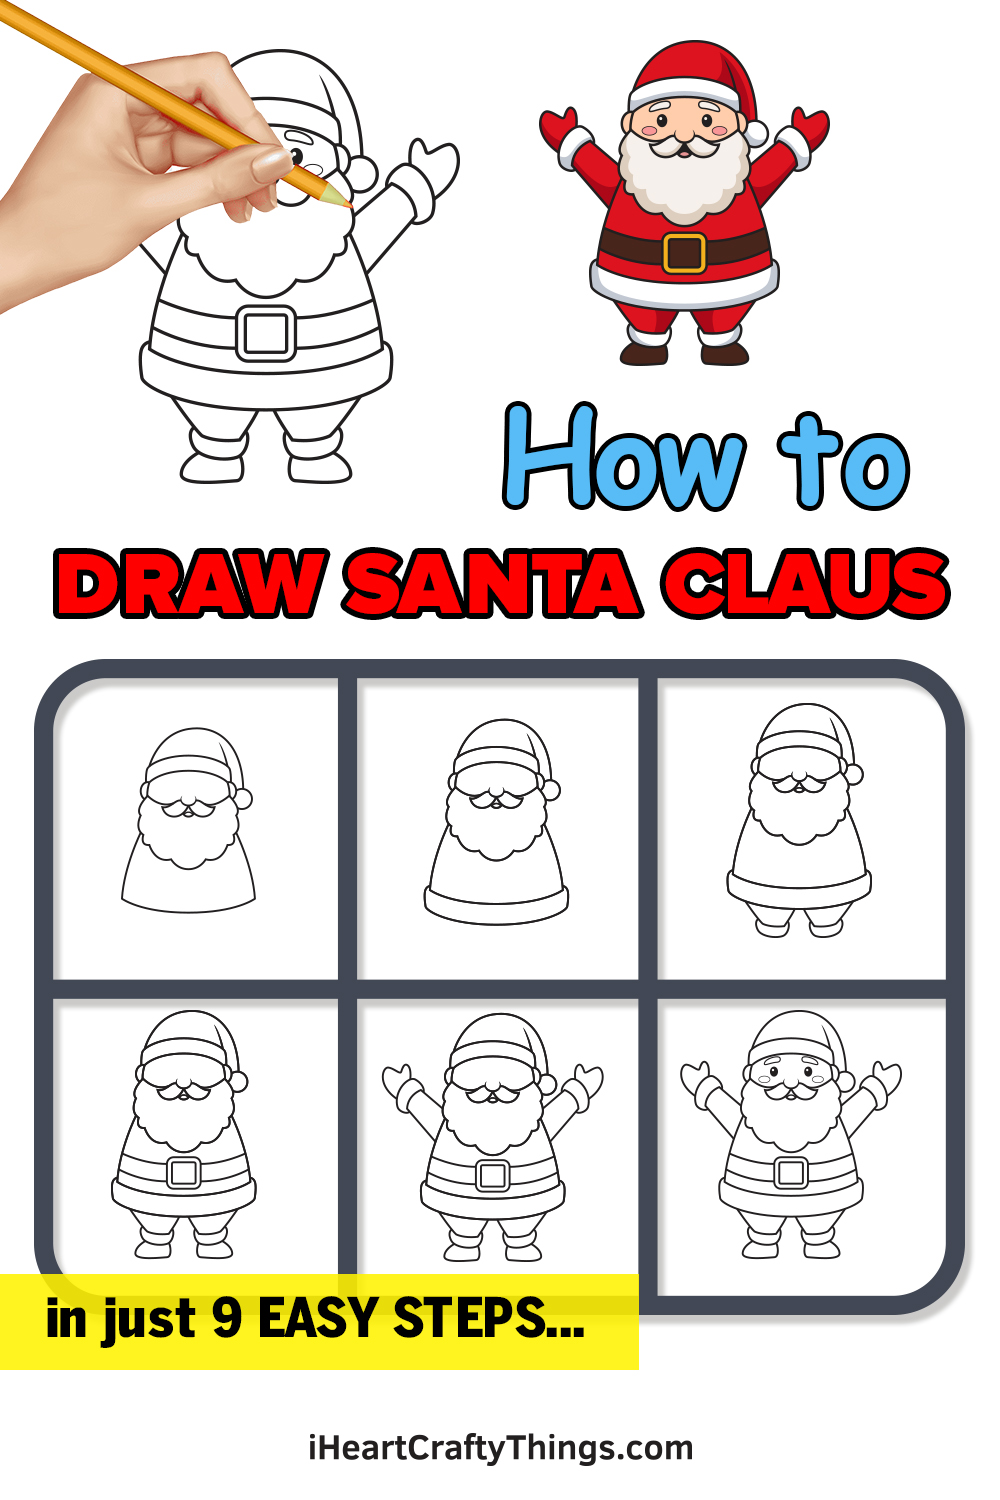 How to Draw Santa Claus in 9 Easy Steps